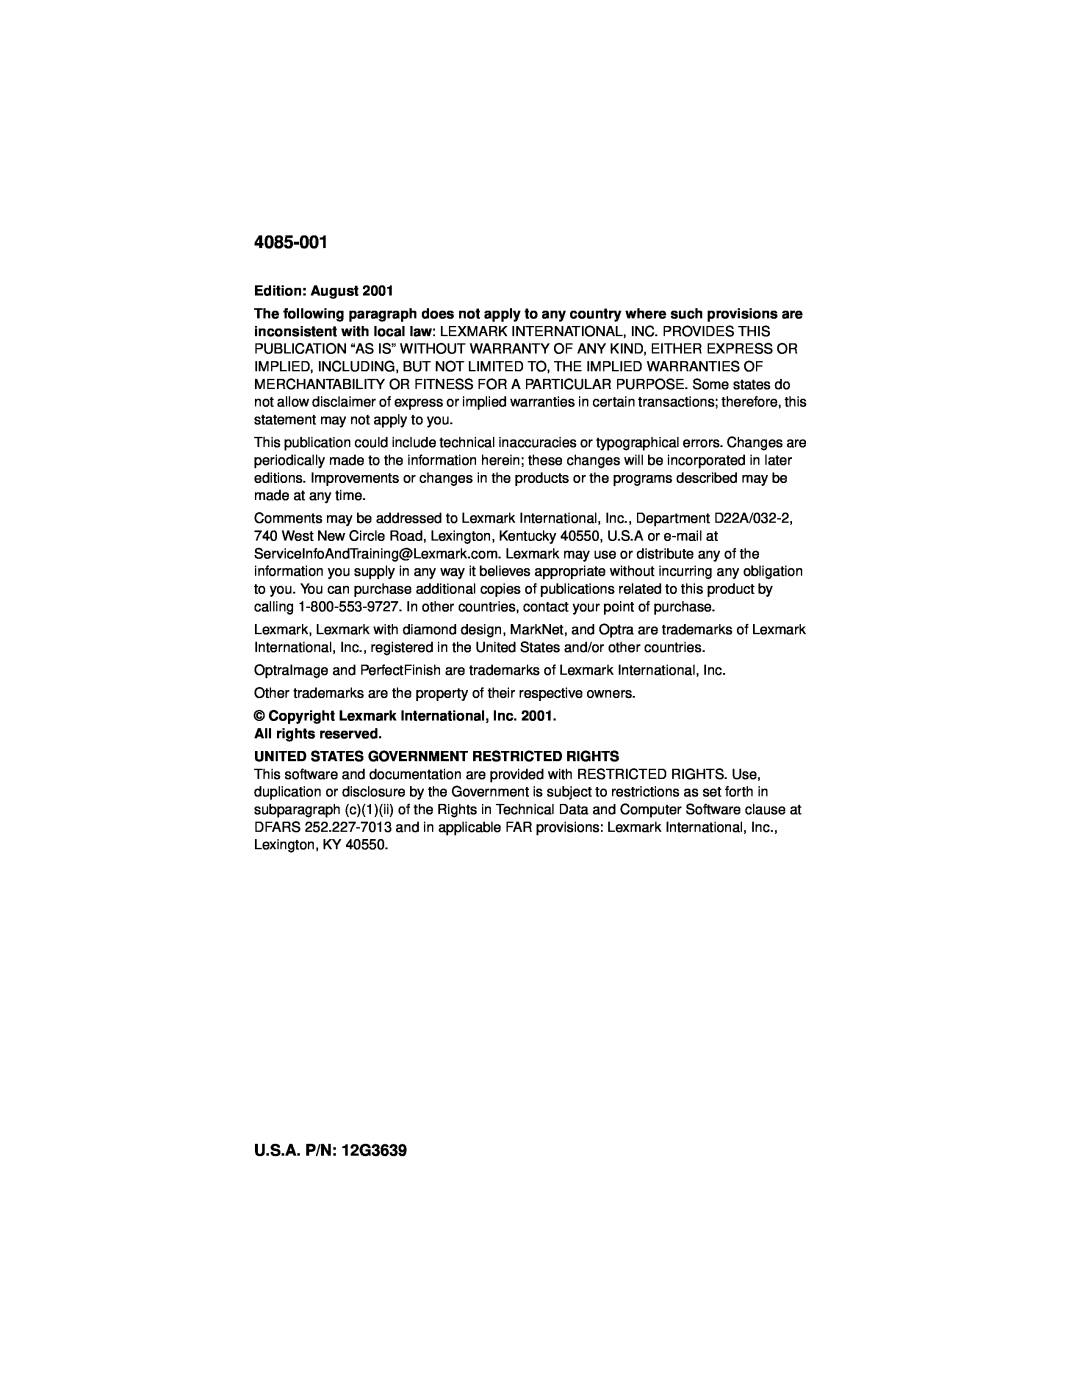 Lexmark J110, Printer manual 4085-001, U.S.A. P/N: 12G3639, Edition: August, United States Government Restricted Rights 